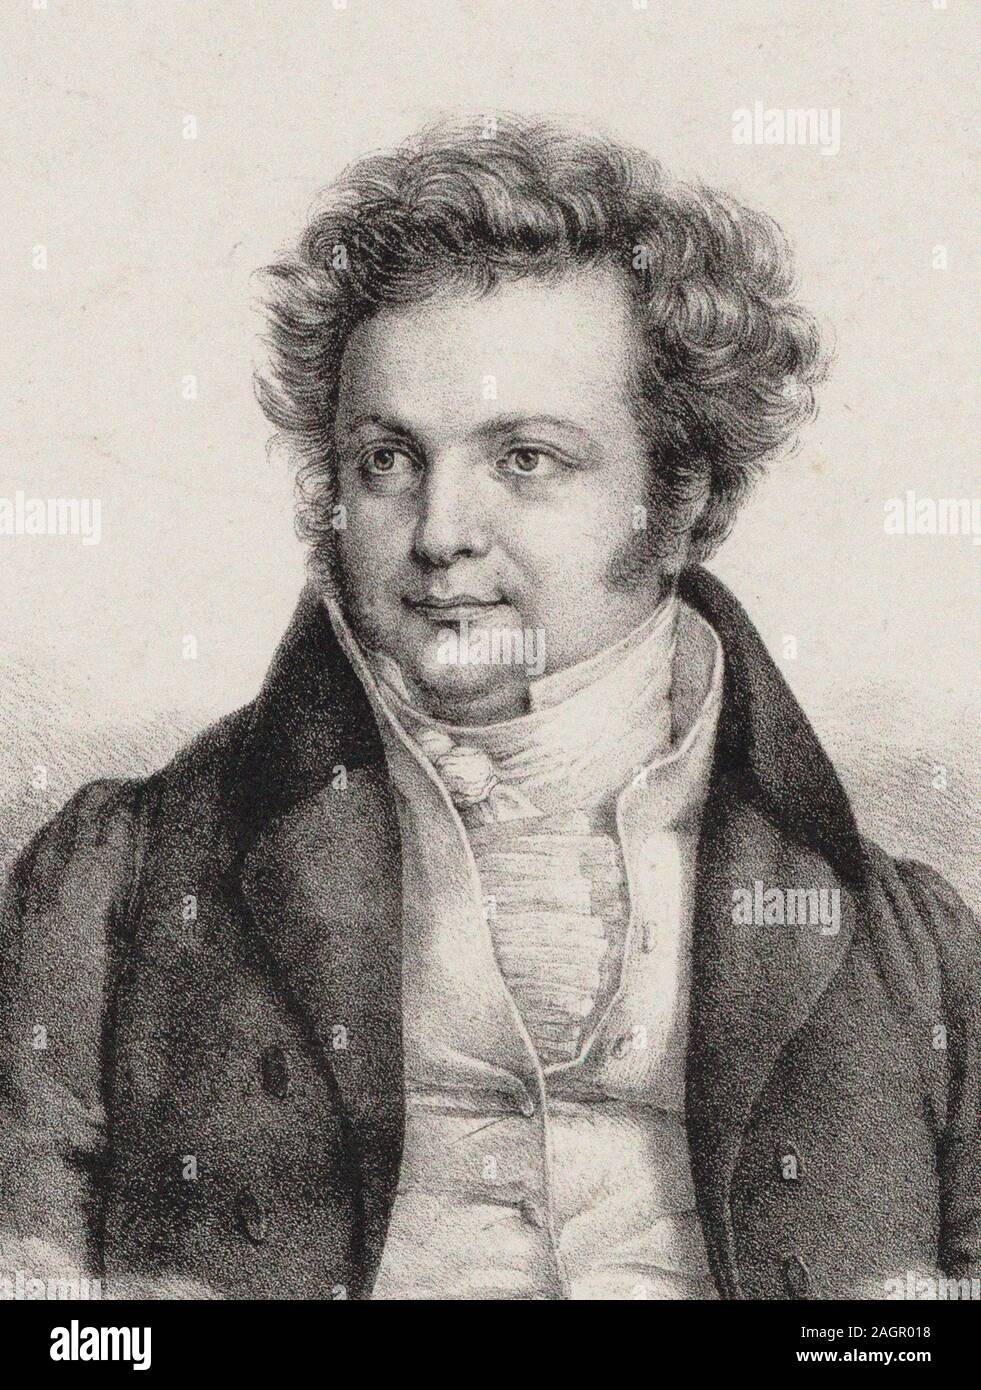 Portrait of the composer Heinrich Marschner (1795-1861). Museum: PRIVATE COLLECTION. Author: CÄCILIE BRANDT. Stock Photo